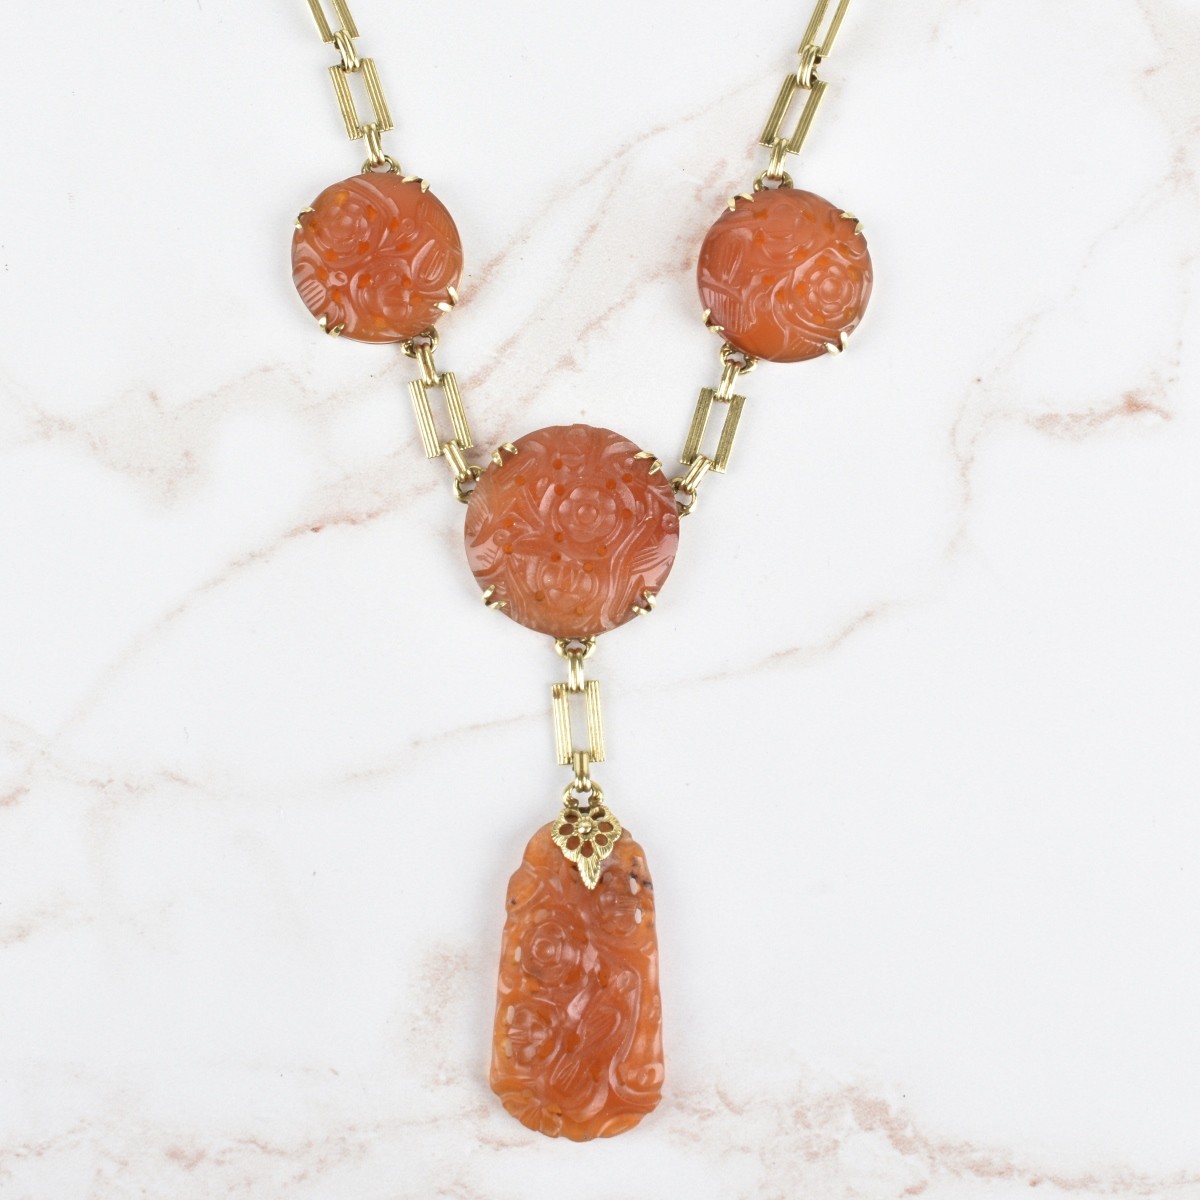 Antique Carnelian and 14K Necklace